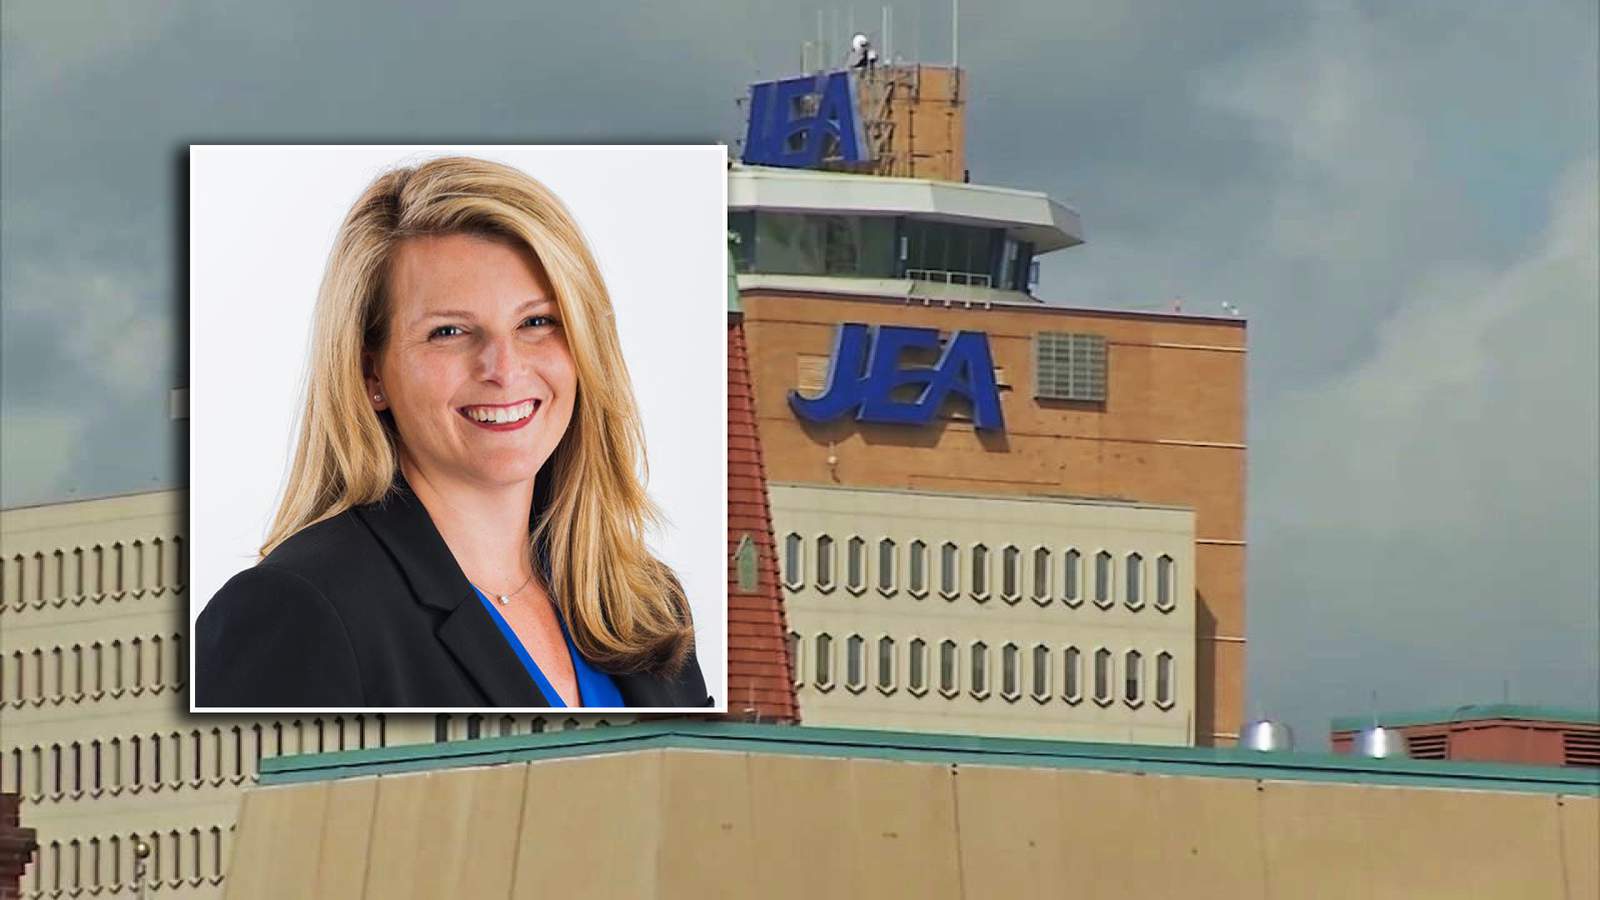 Interim CEO says JEA should remain owned by the City of Jacksonville